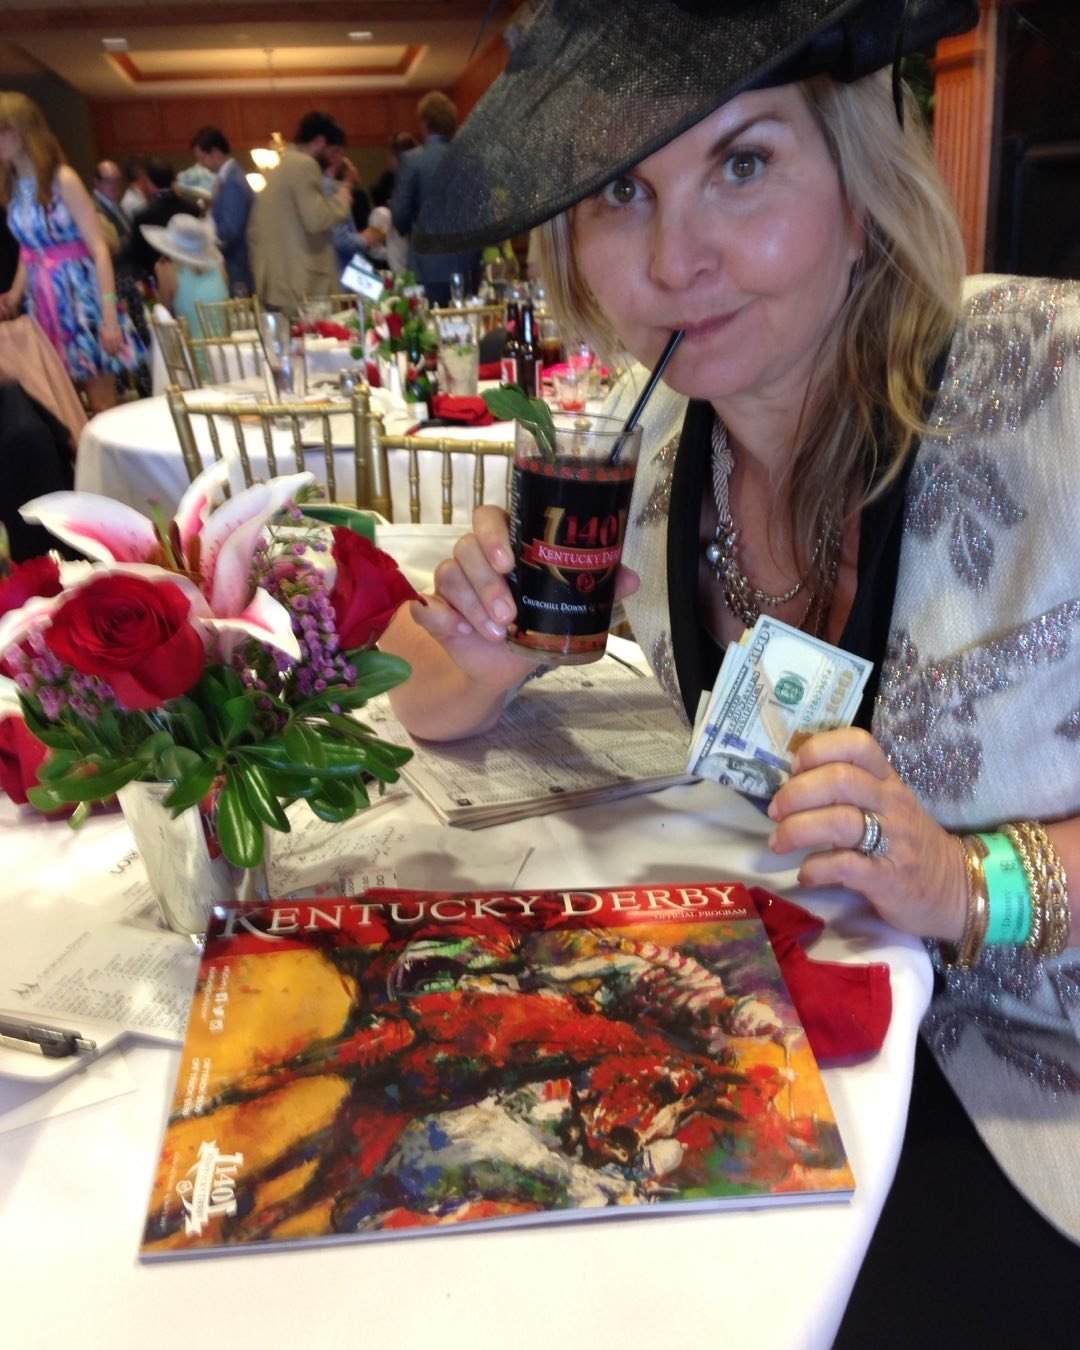 Throw back Derby Day. 140th. I lost, but it was a blast. Thank you Jane and Longines for the memory. So fancy and fun.